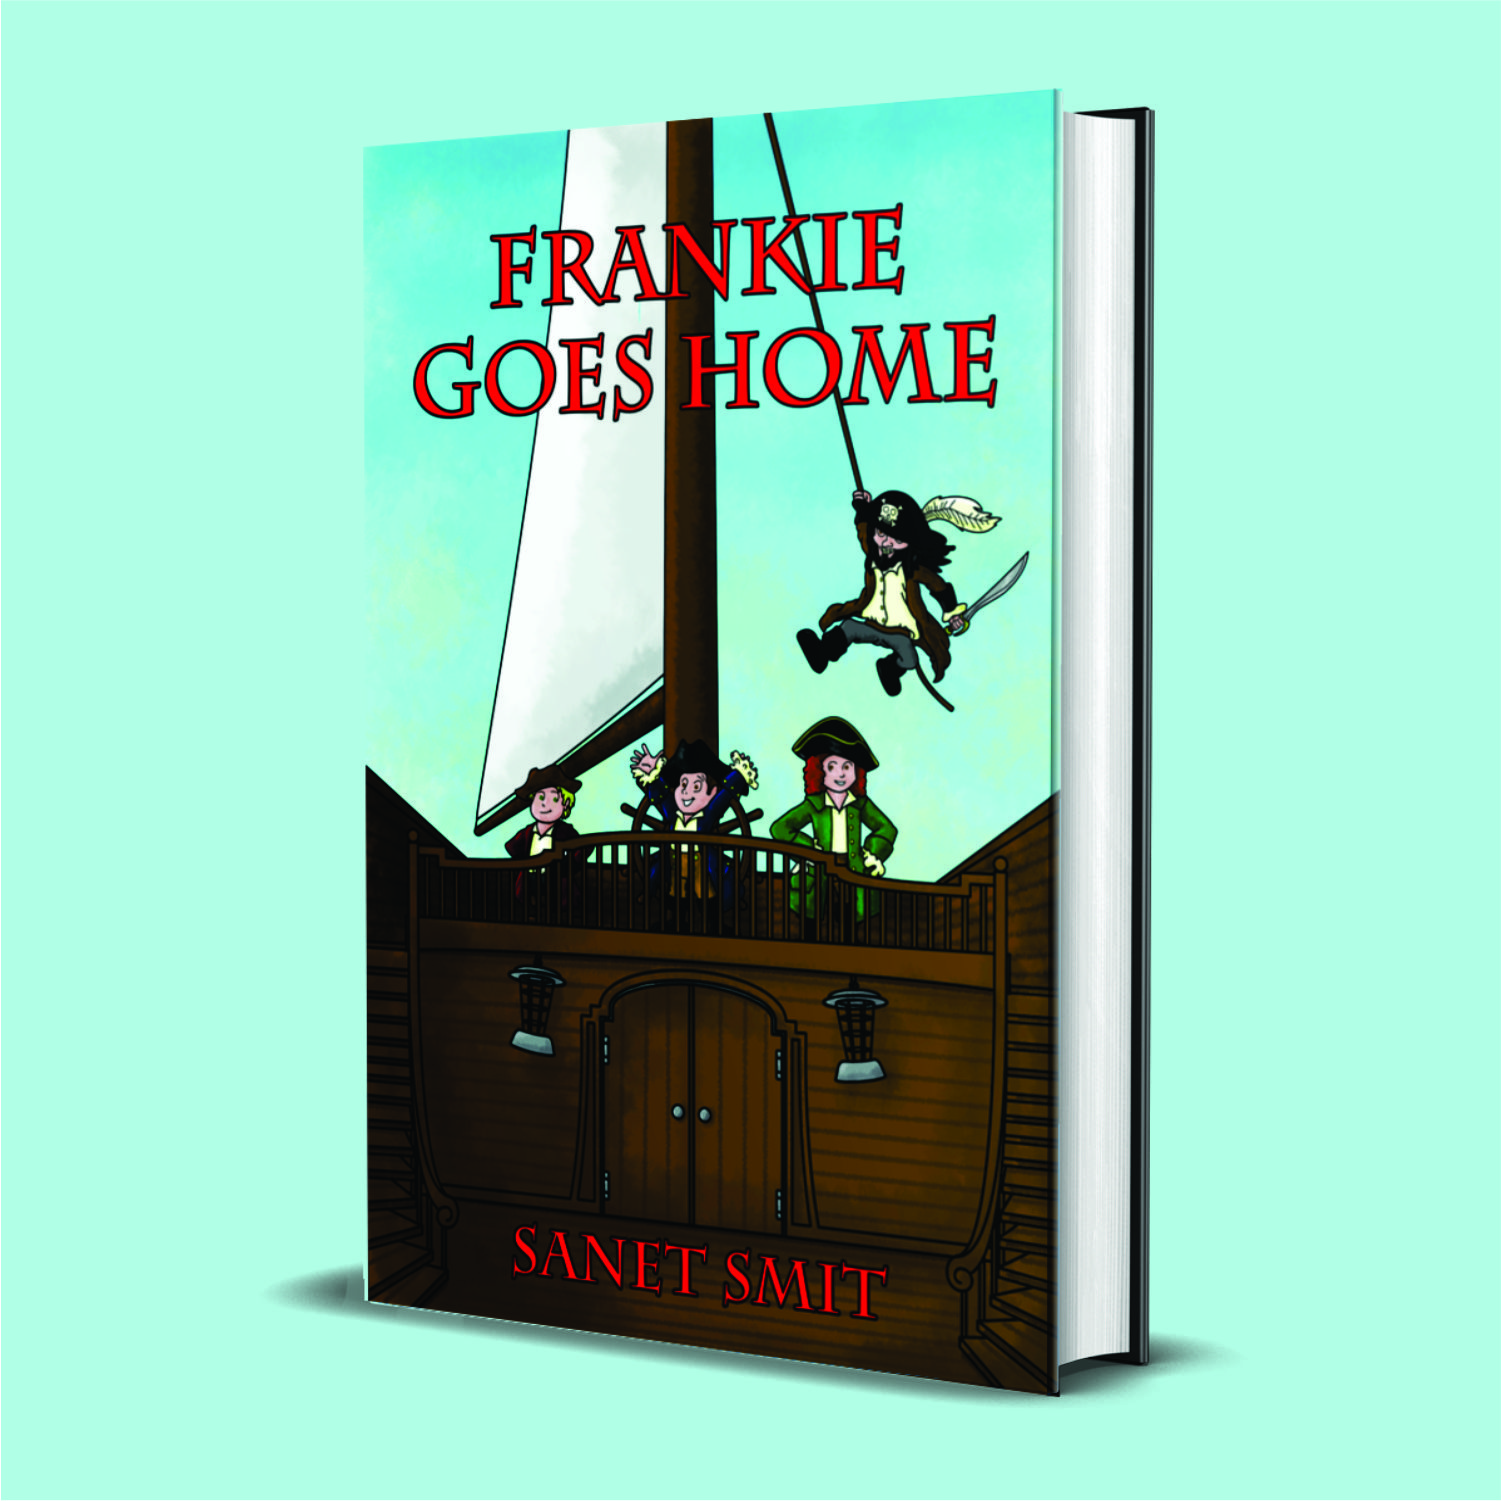 New Children’s Book, Frankie Goes Home, Teaches Love and Resilience to Kids